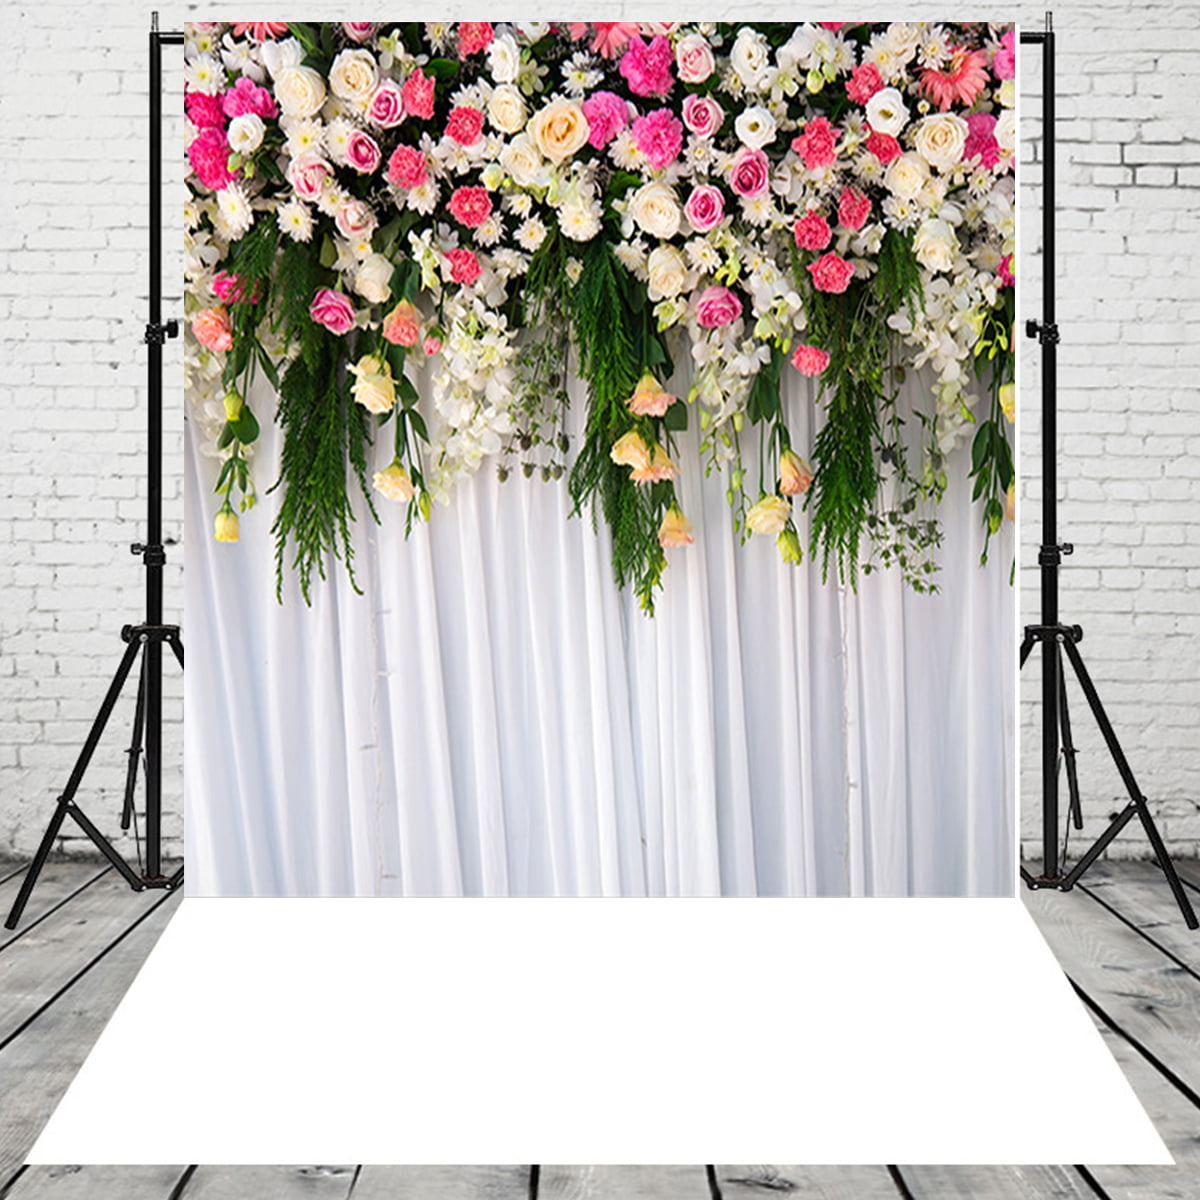 LFEEY 5x3ft Vinyl Happy Birthday Backdrop for Photography Green Plant Leaves Pink Flowers Natural and Fresh Photo Background Baby Shower Boy Girls Adults Kids Portrait Photography Decor Studio Props 